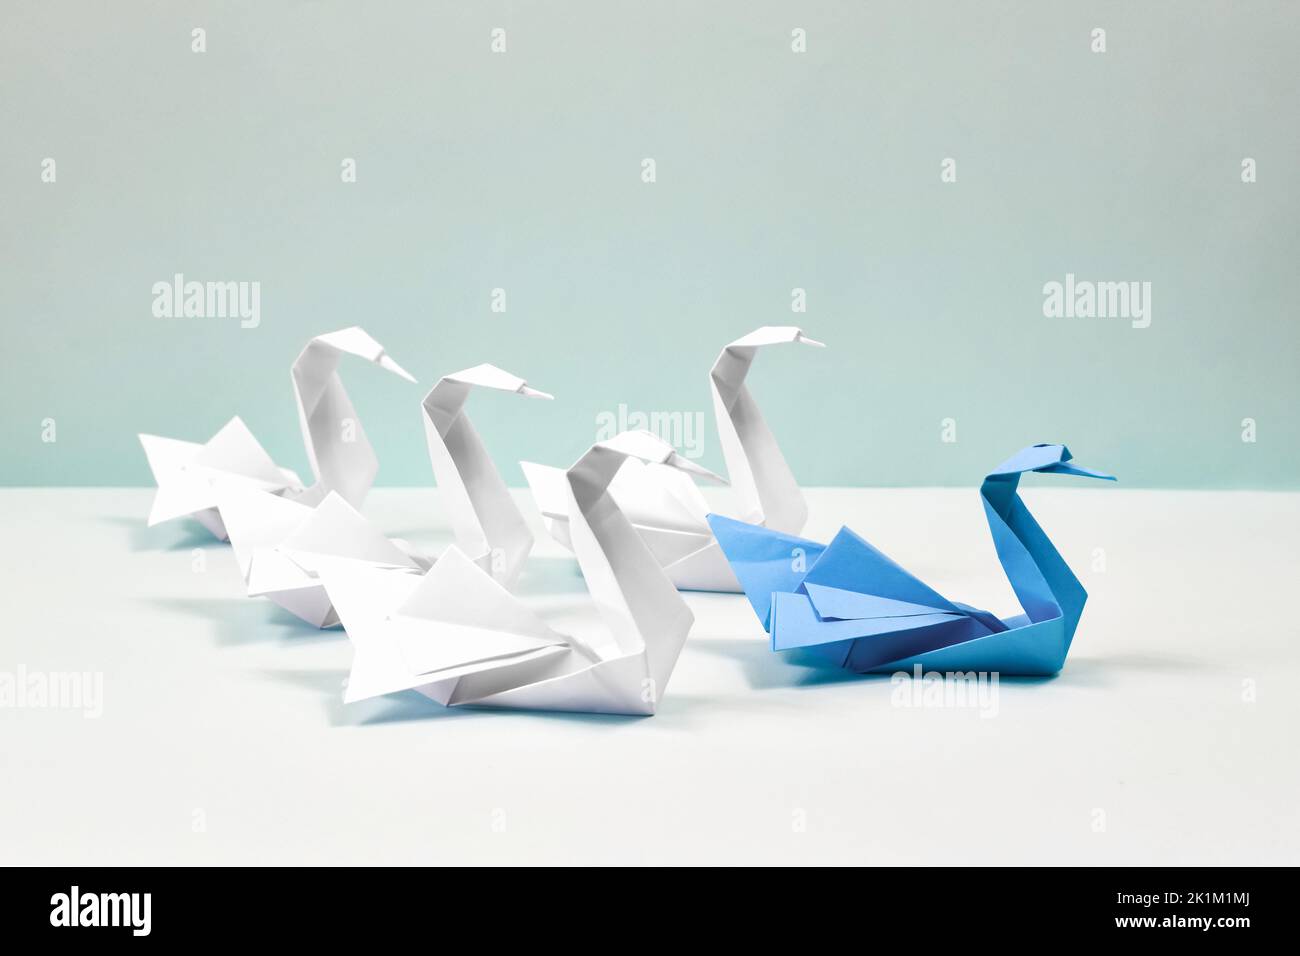 A blue swan leads a flock of white swans. Paper swans on a blue background. Origami. Leadership concept. Stock Photo